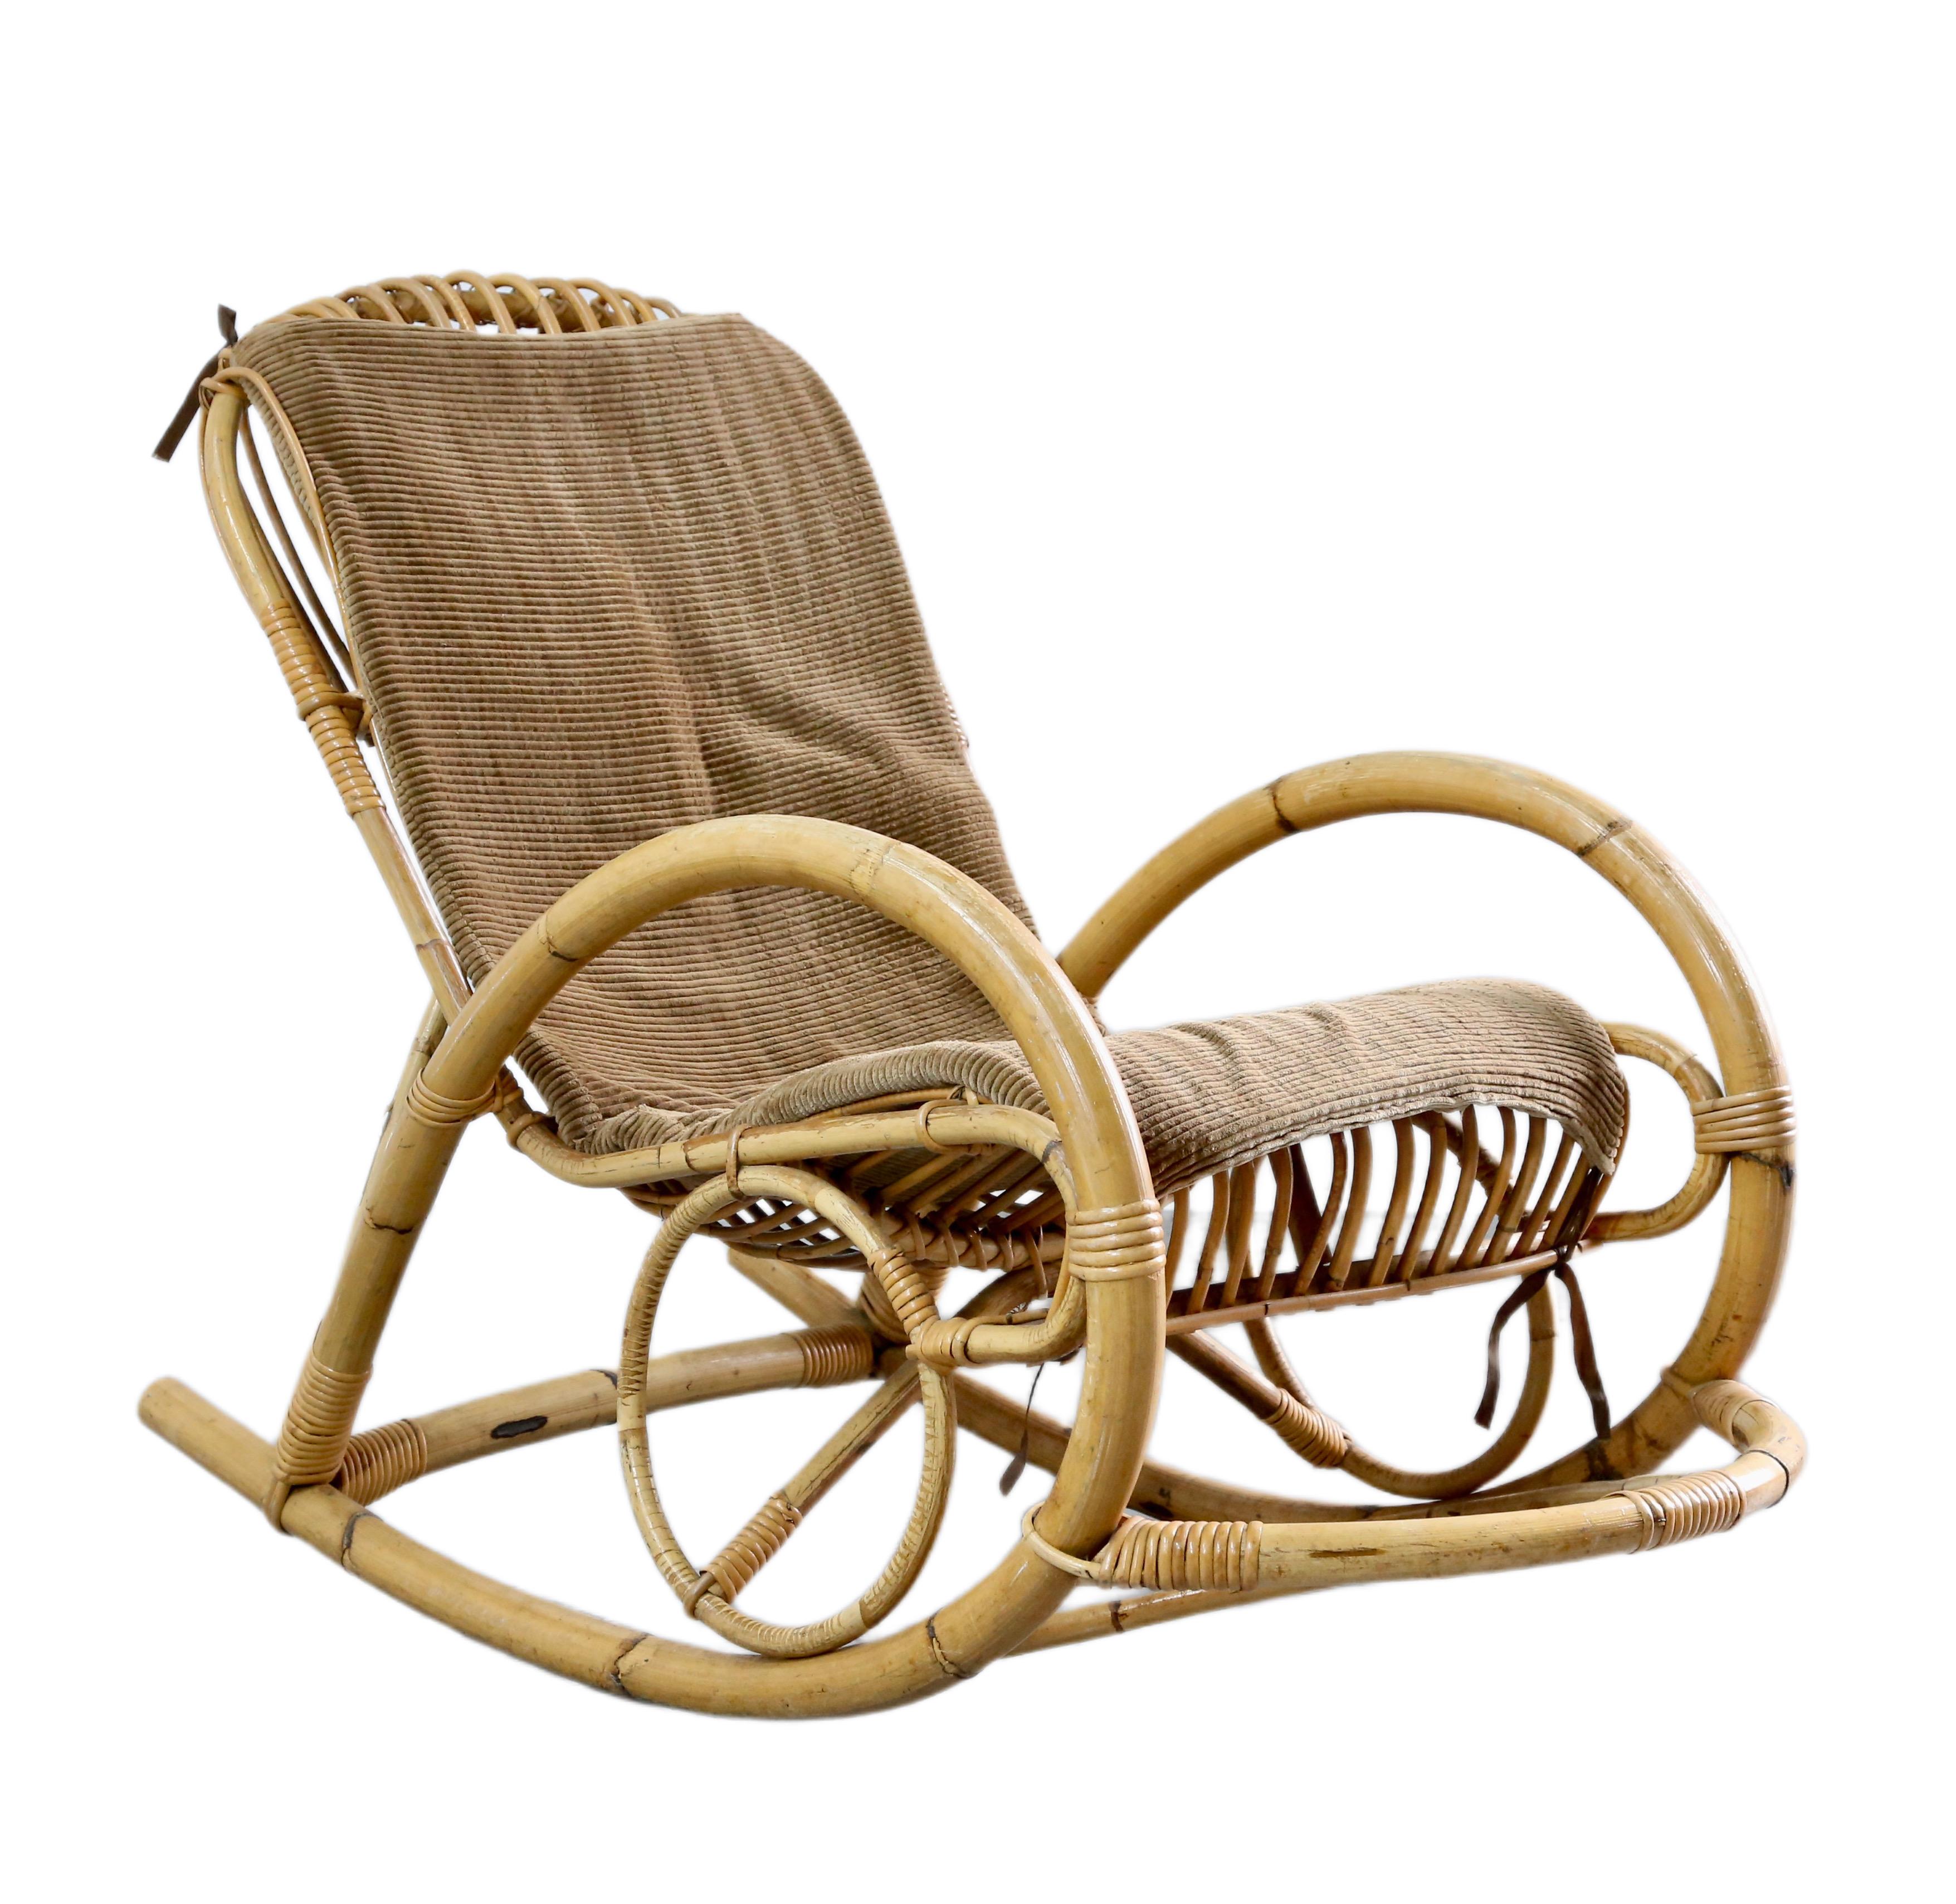 Boho Style Bamboo Wicker Rocking Chair By Dirk Van Sliedregt For Rohe Noordwolde For Sale 1